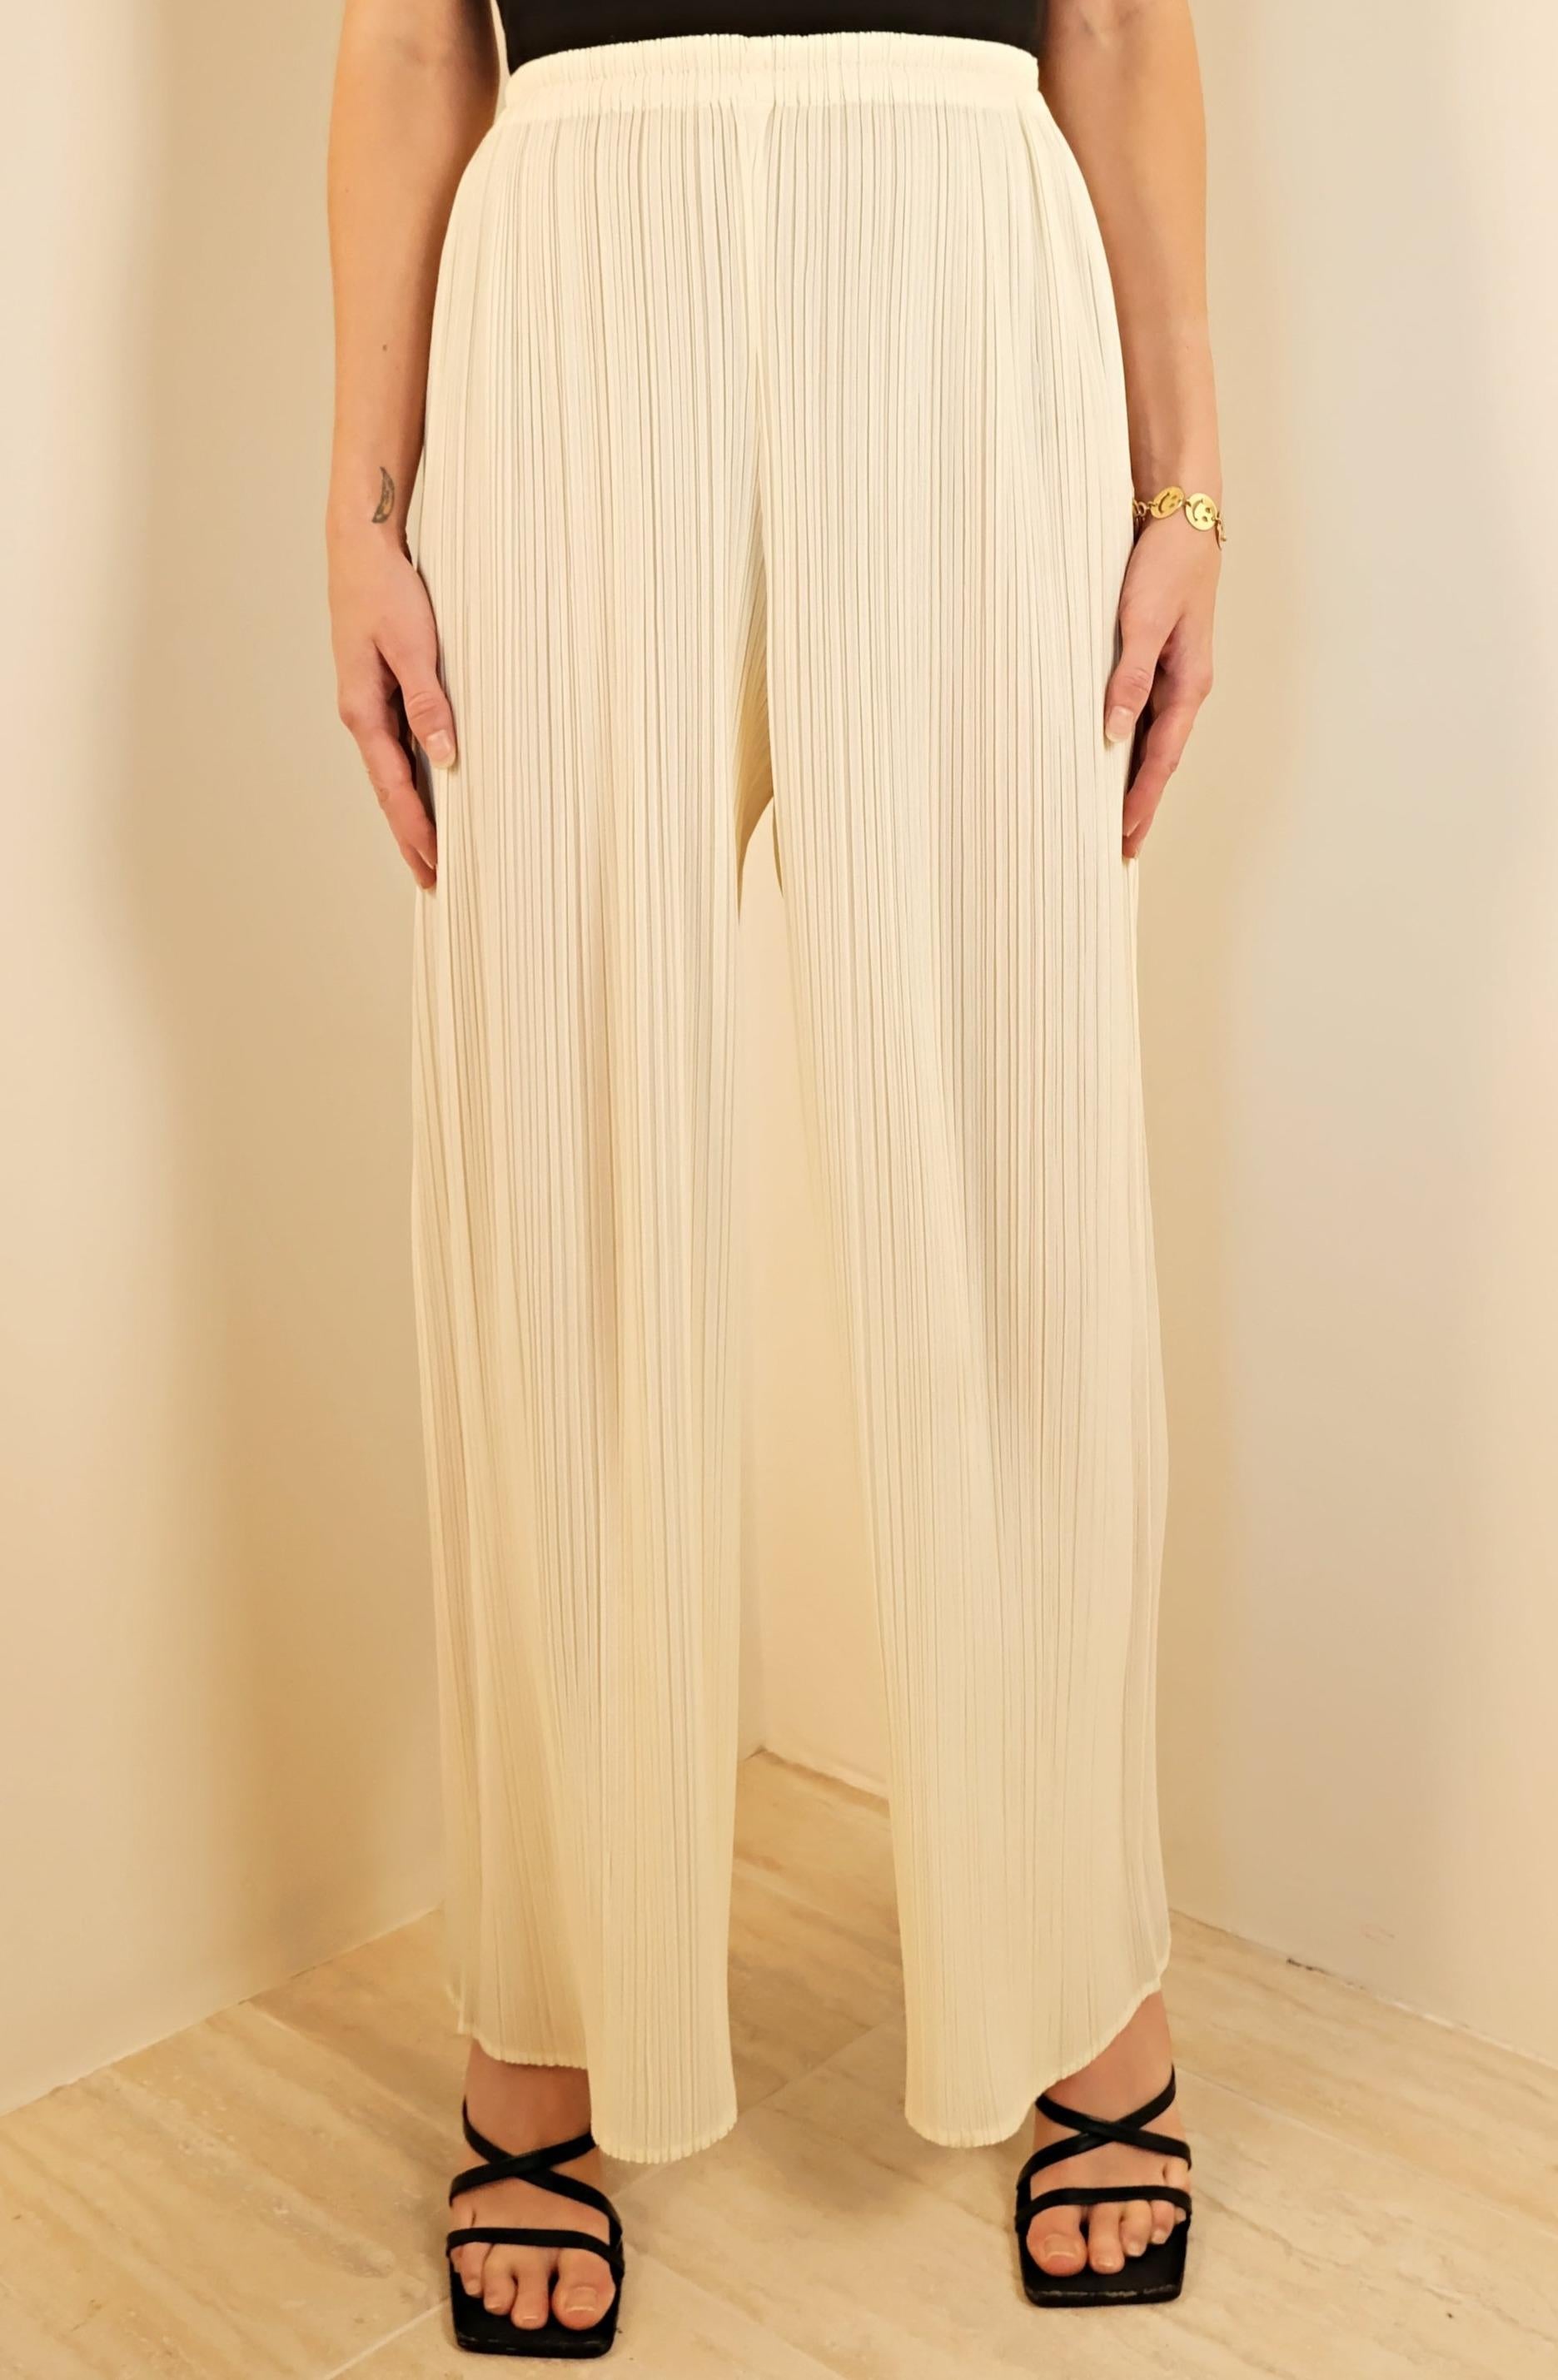 ISSEY MIYAKE Pleats Please Flowy Cream Pants In Good Condition For Sale In Morongo Valley, CA